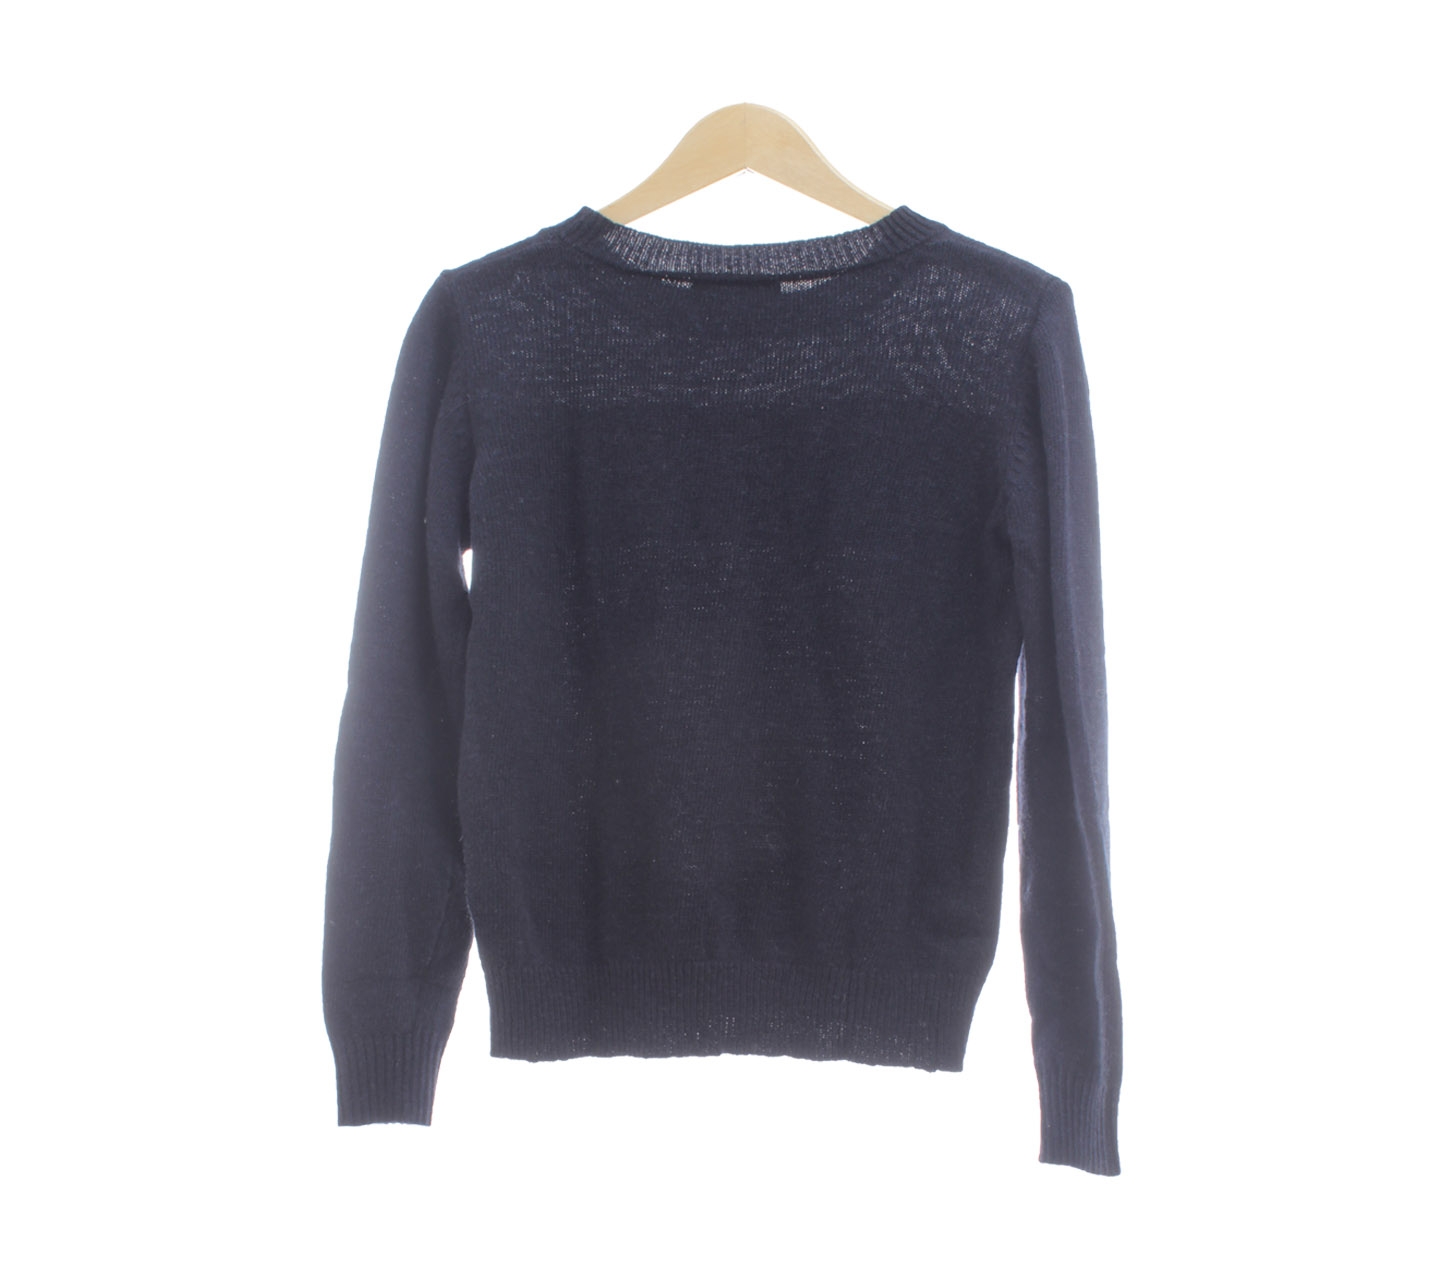 Eastboy Navy Knit Sweater